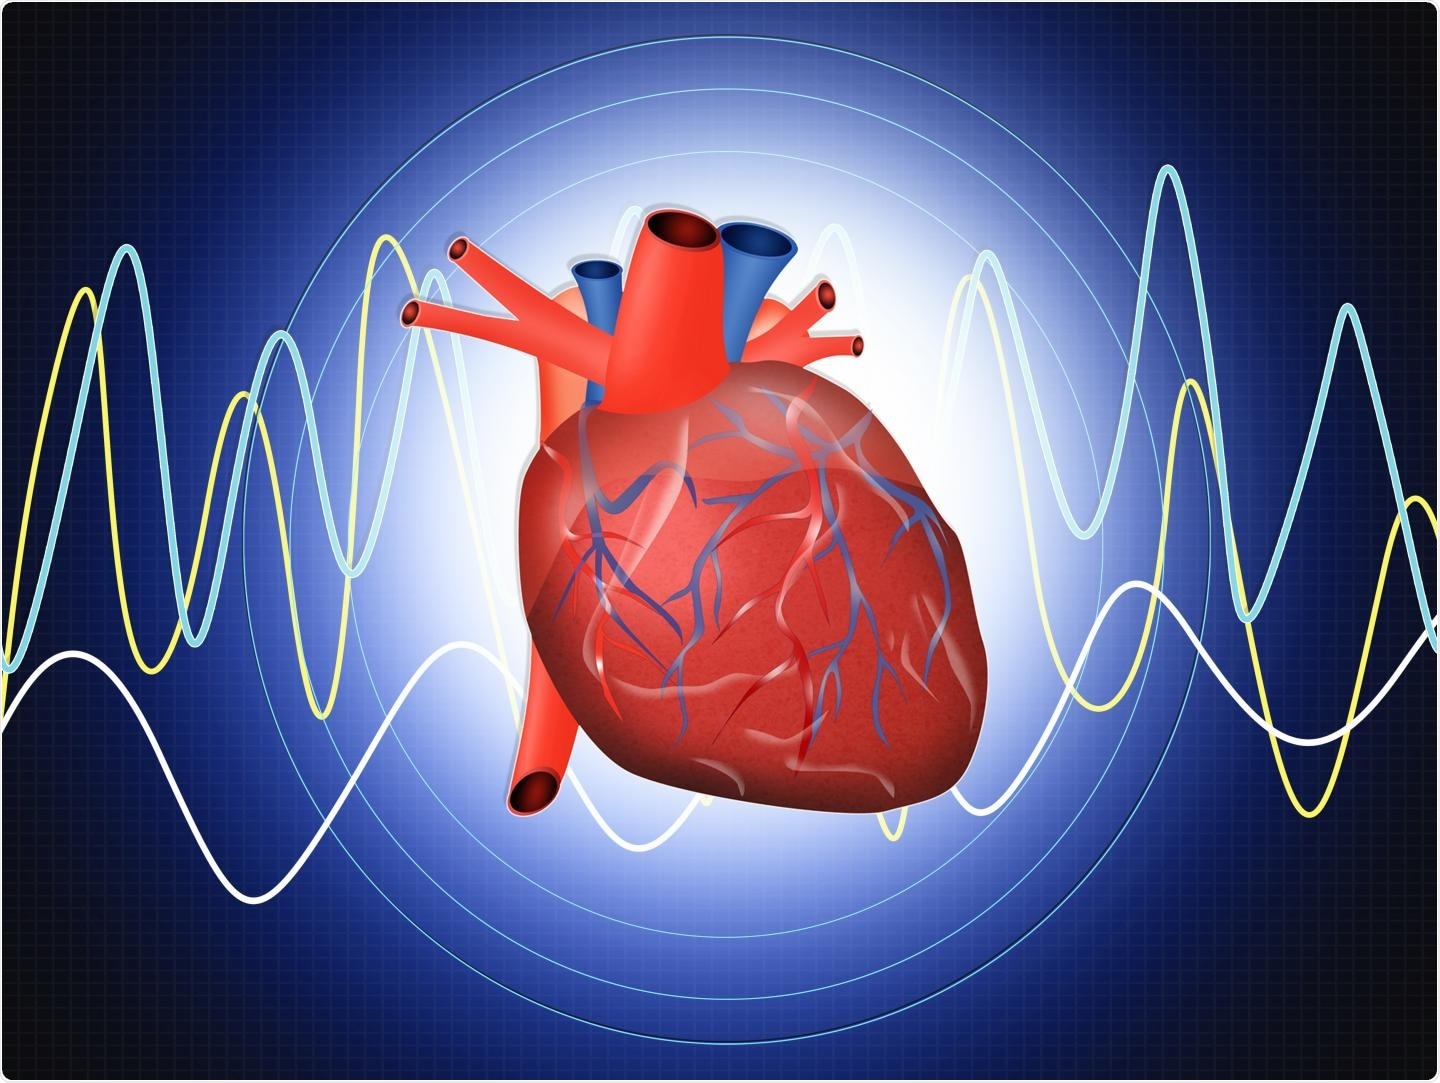 Researchers identify new biomarkers associated with incident heart failure